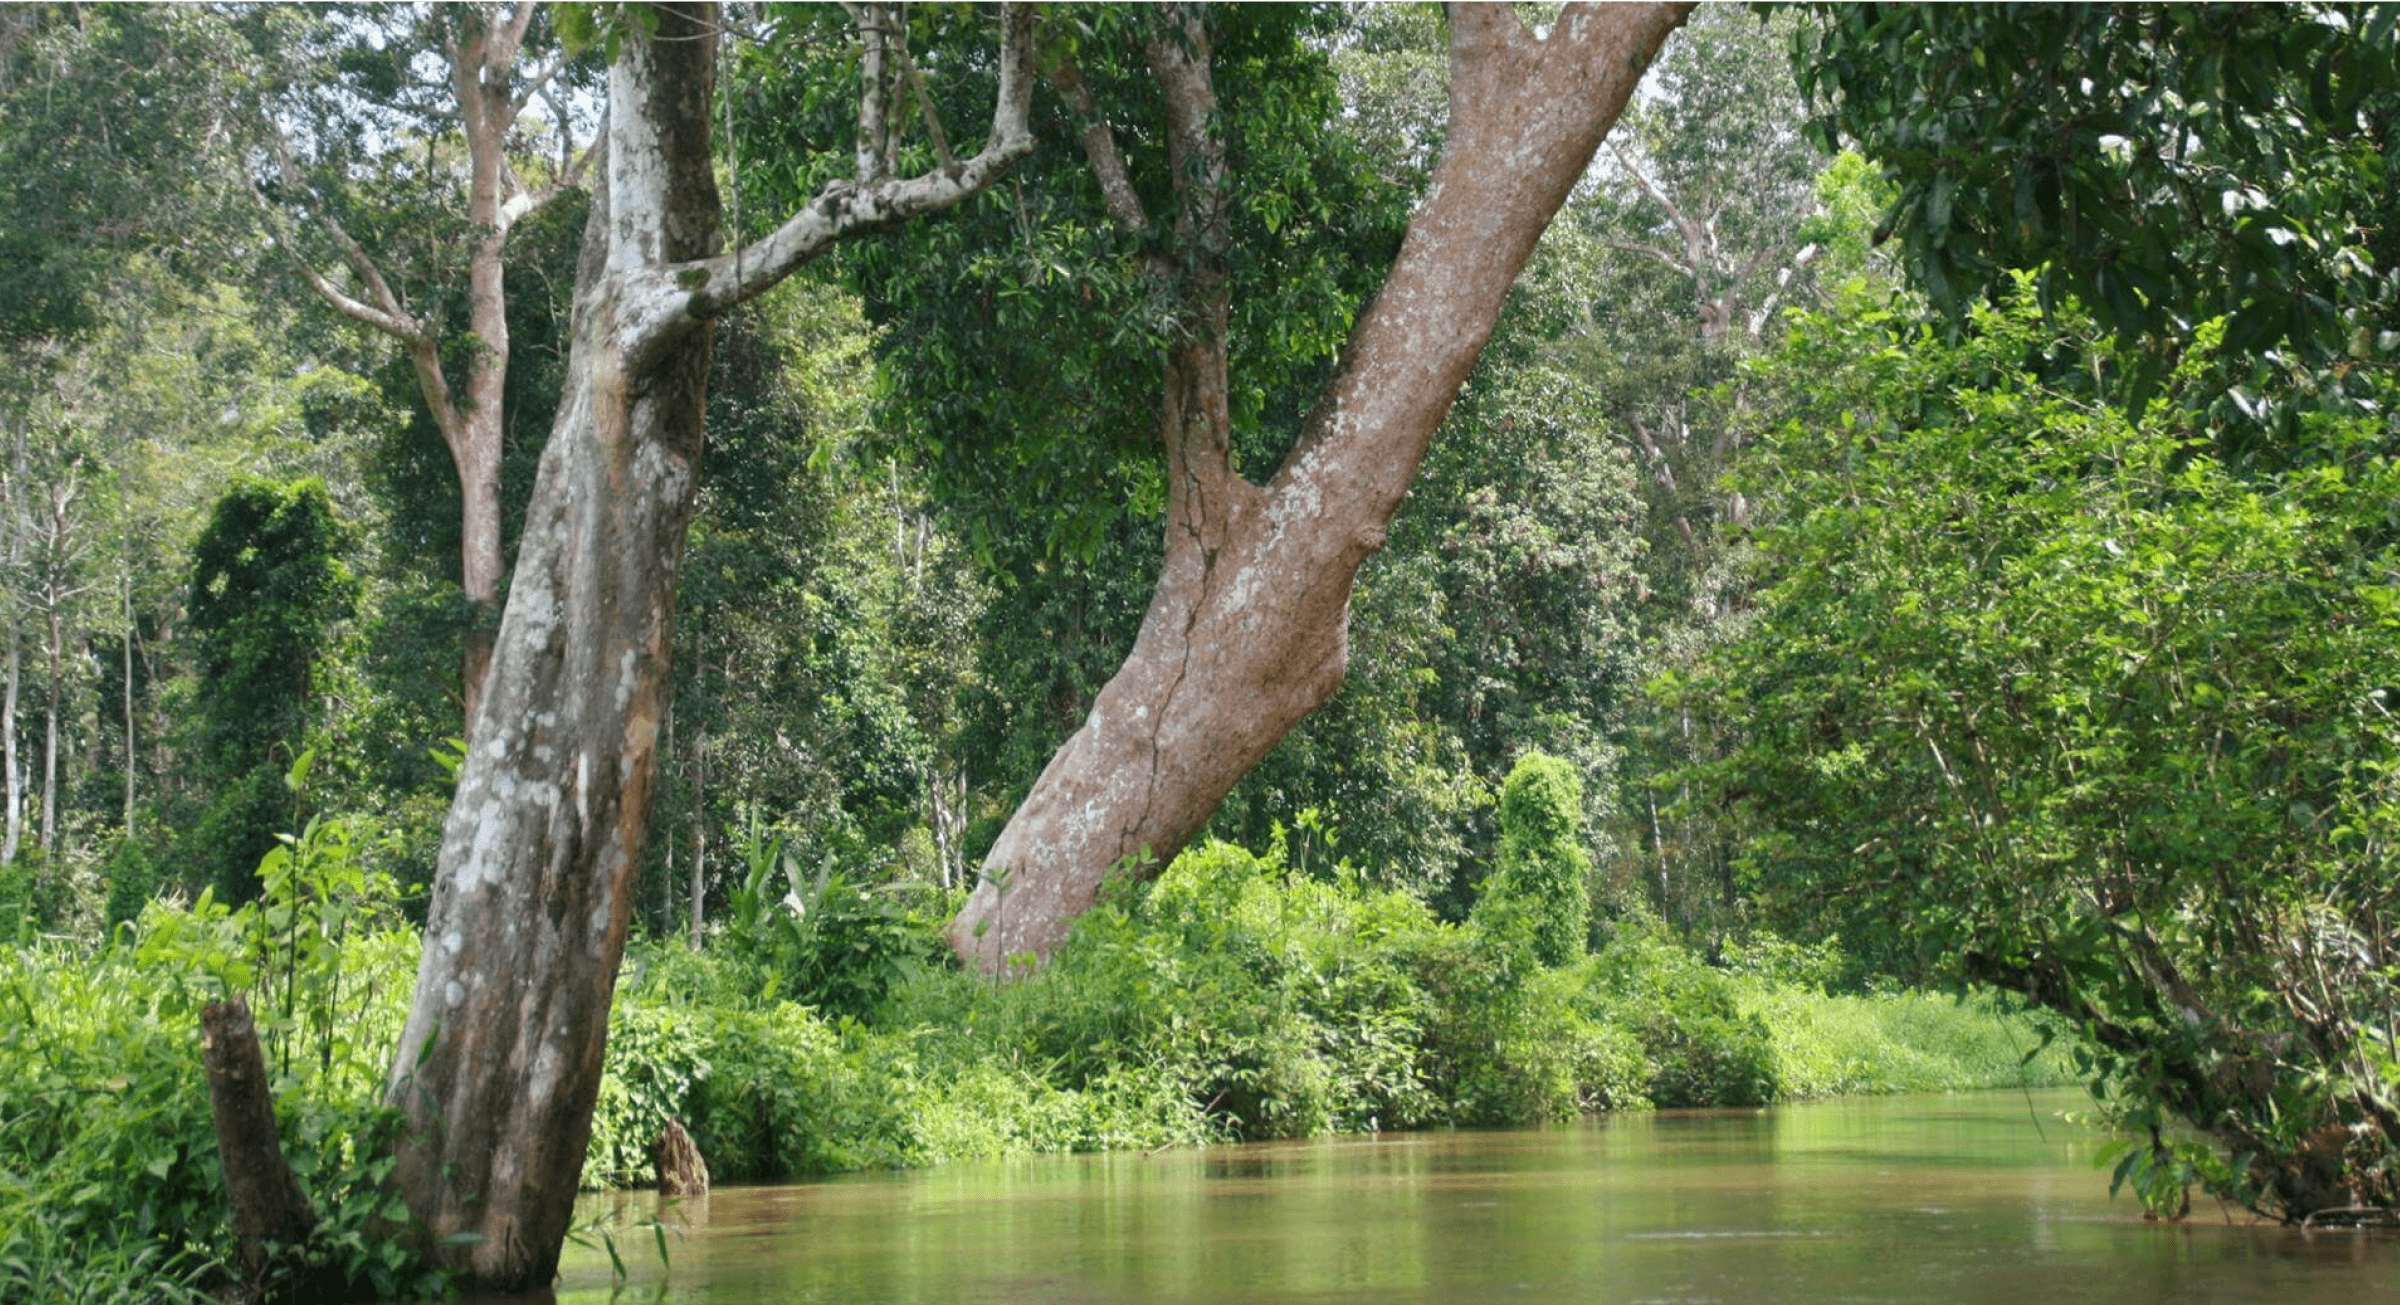 River and trees at Rimba Raya forest conservation project